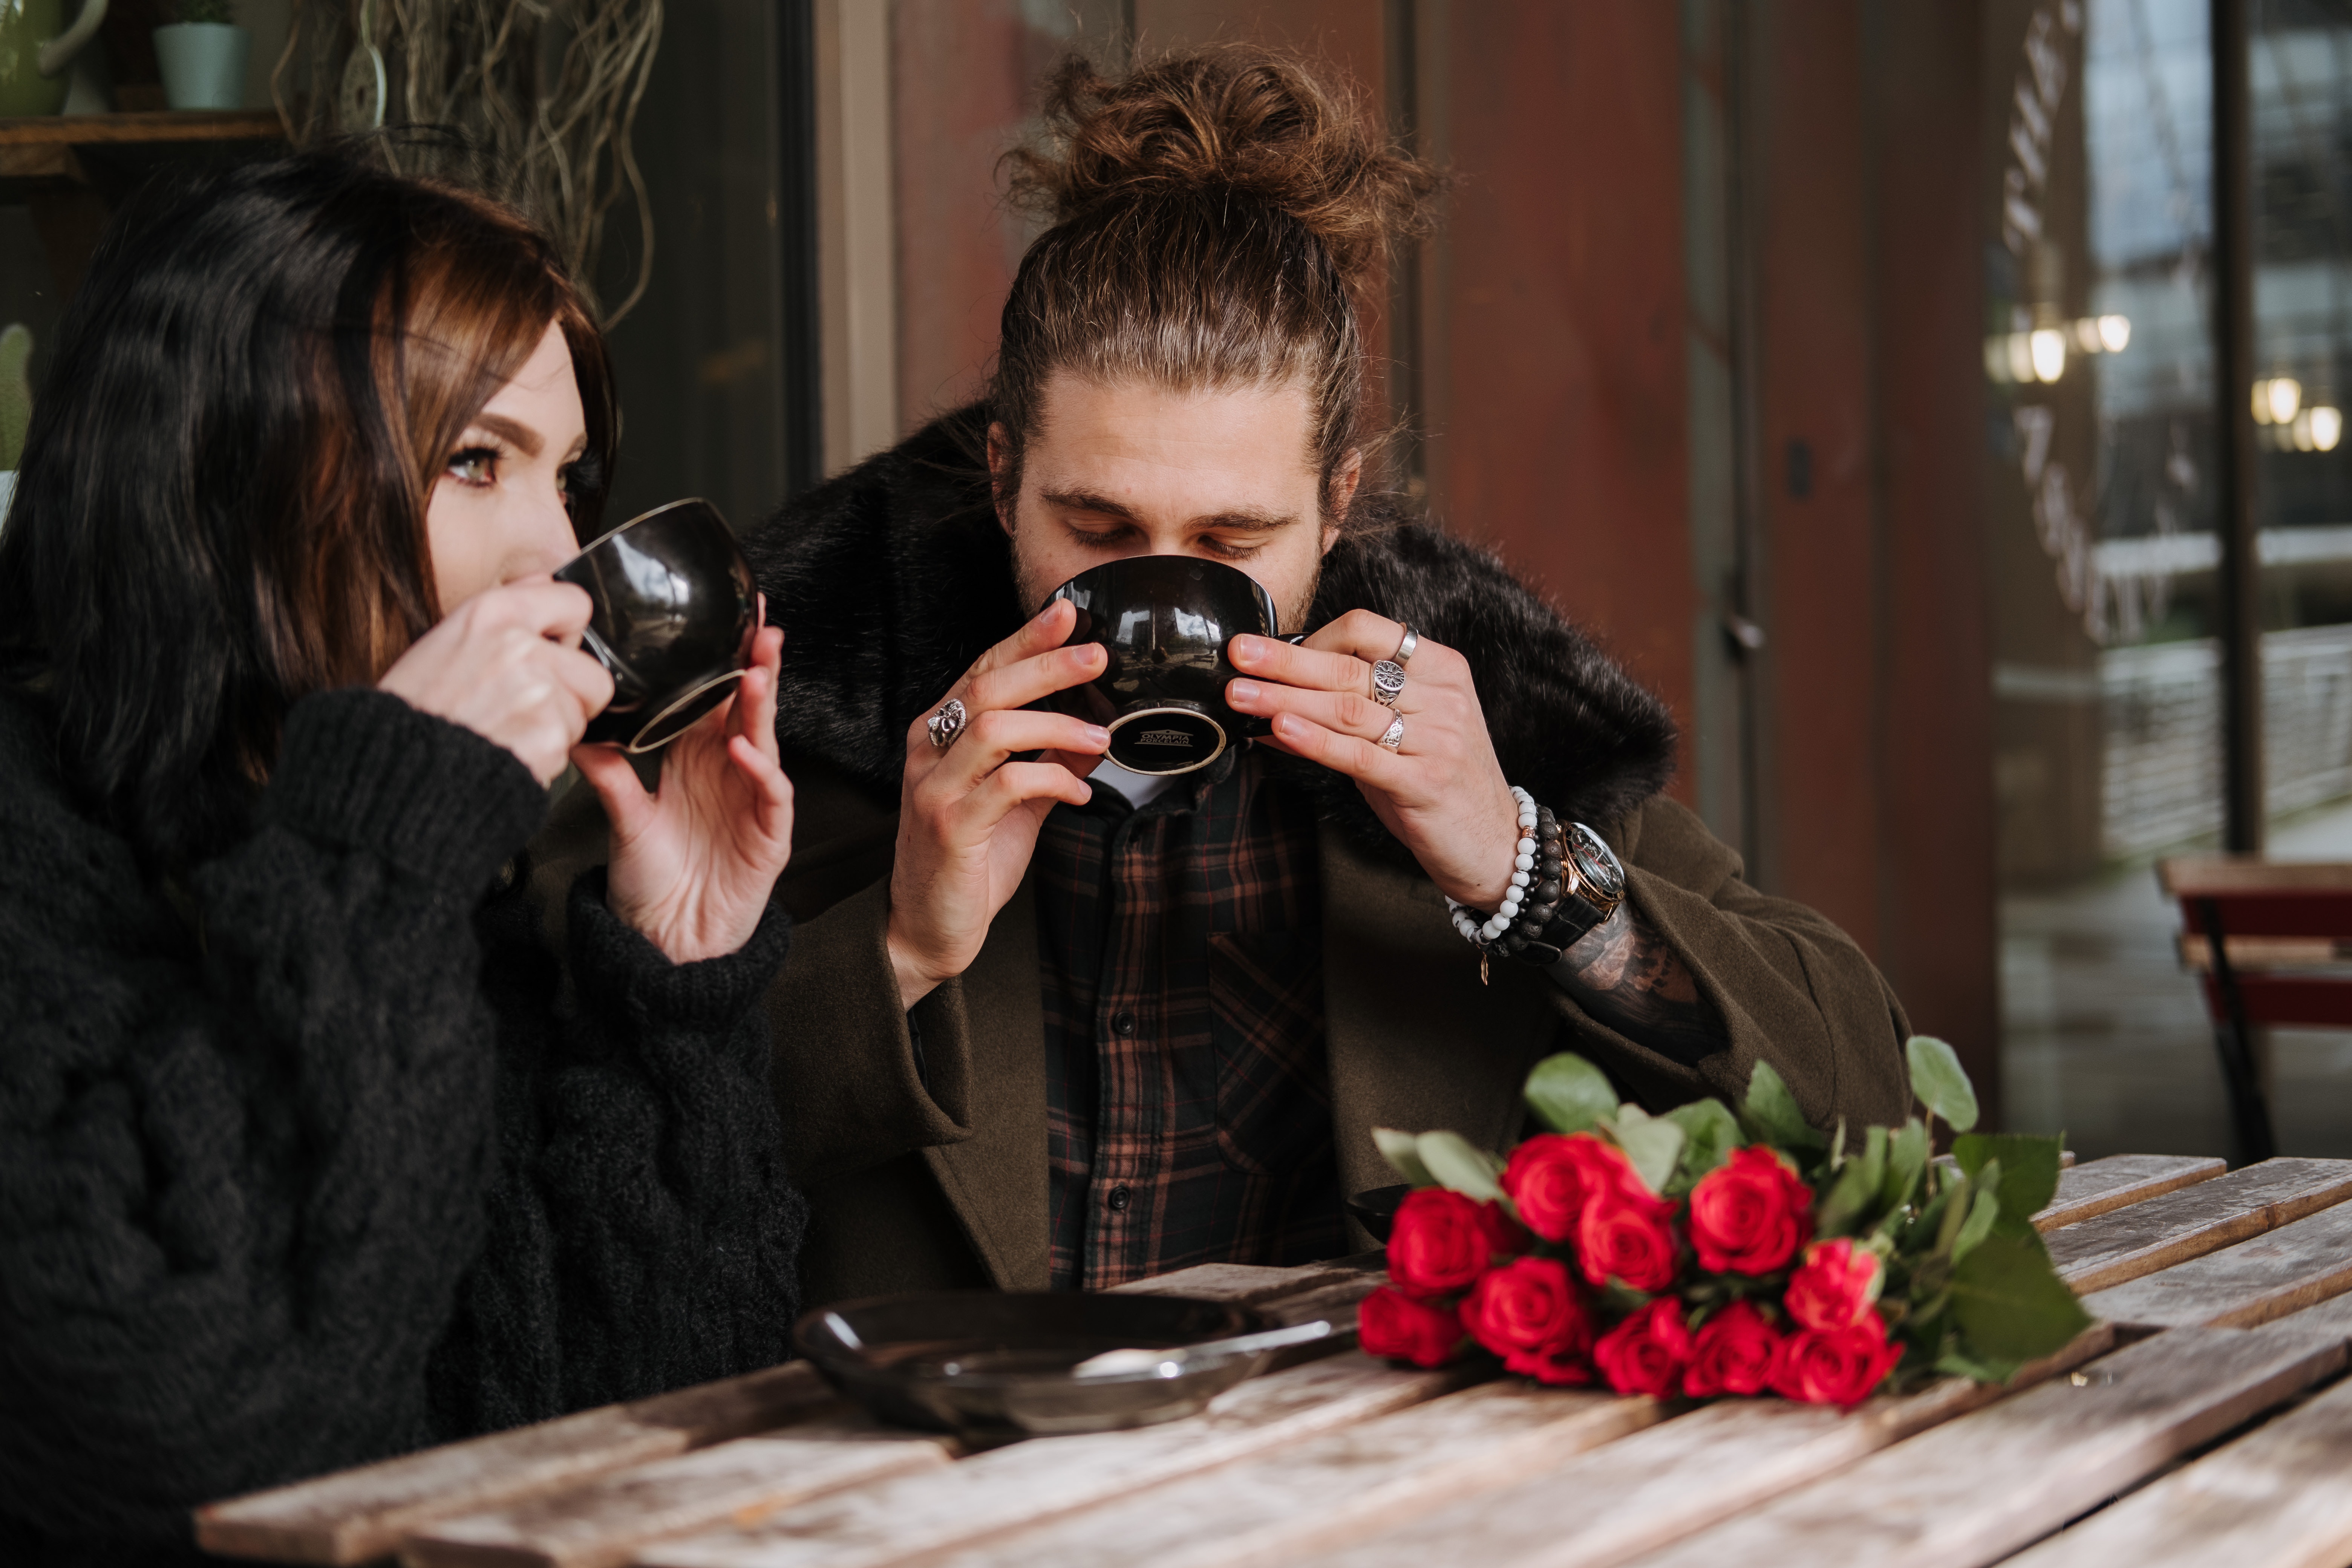 A couple drinking coffee together. | Source: Pexels